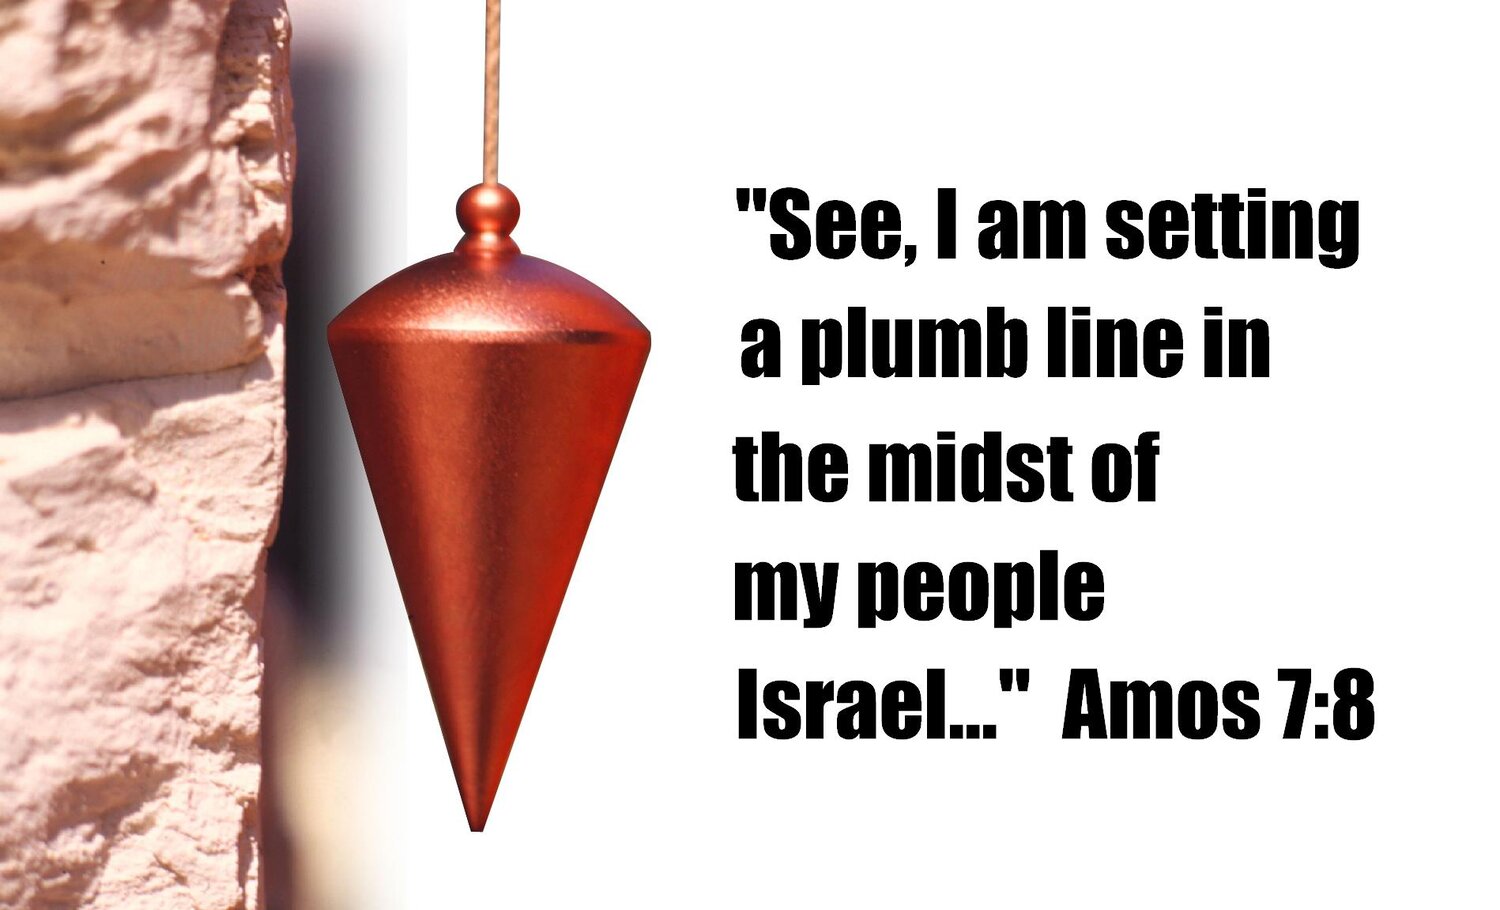 Christ as the Plumb Line in Amos